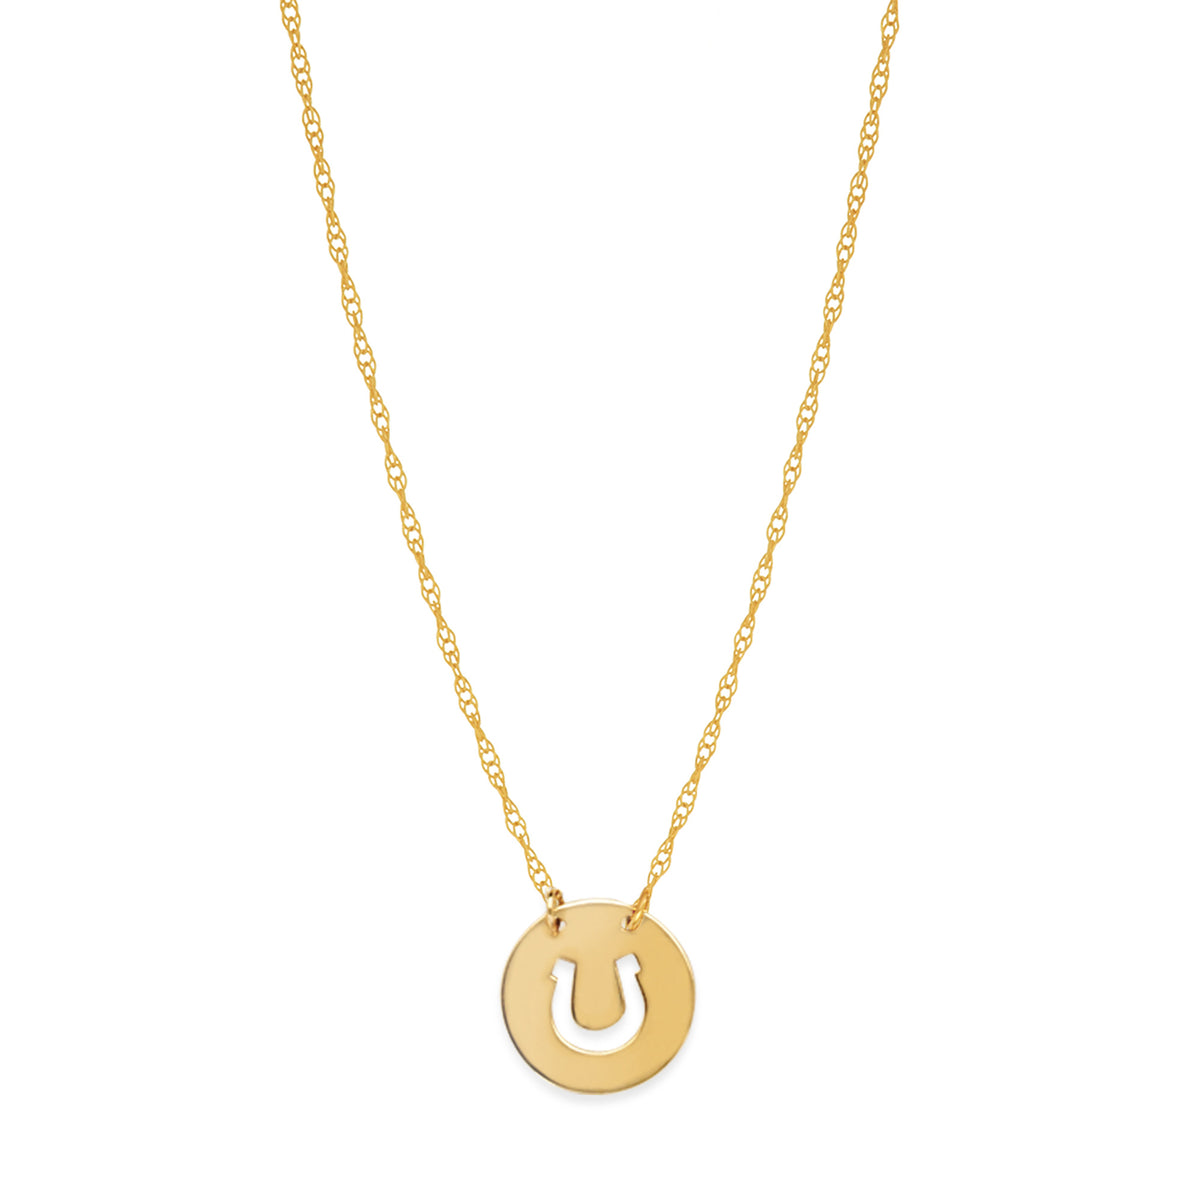 14K Yellow Gold Mini Horse Shoe Pendant Necklace, 16" To 18" Adjustable fine designer jewelry for men and women